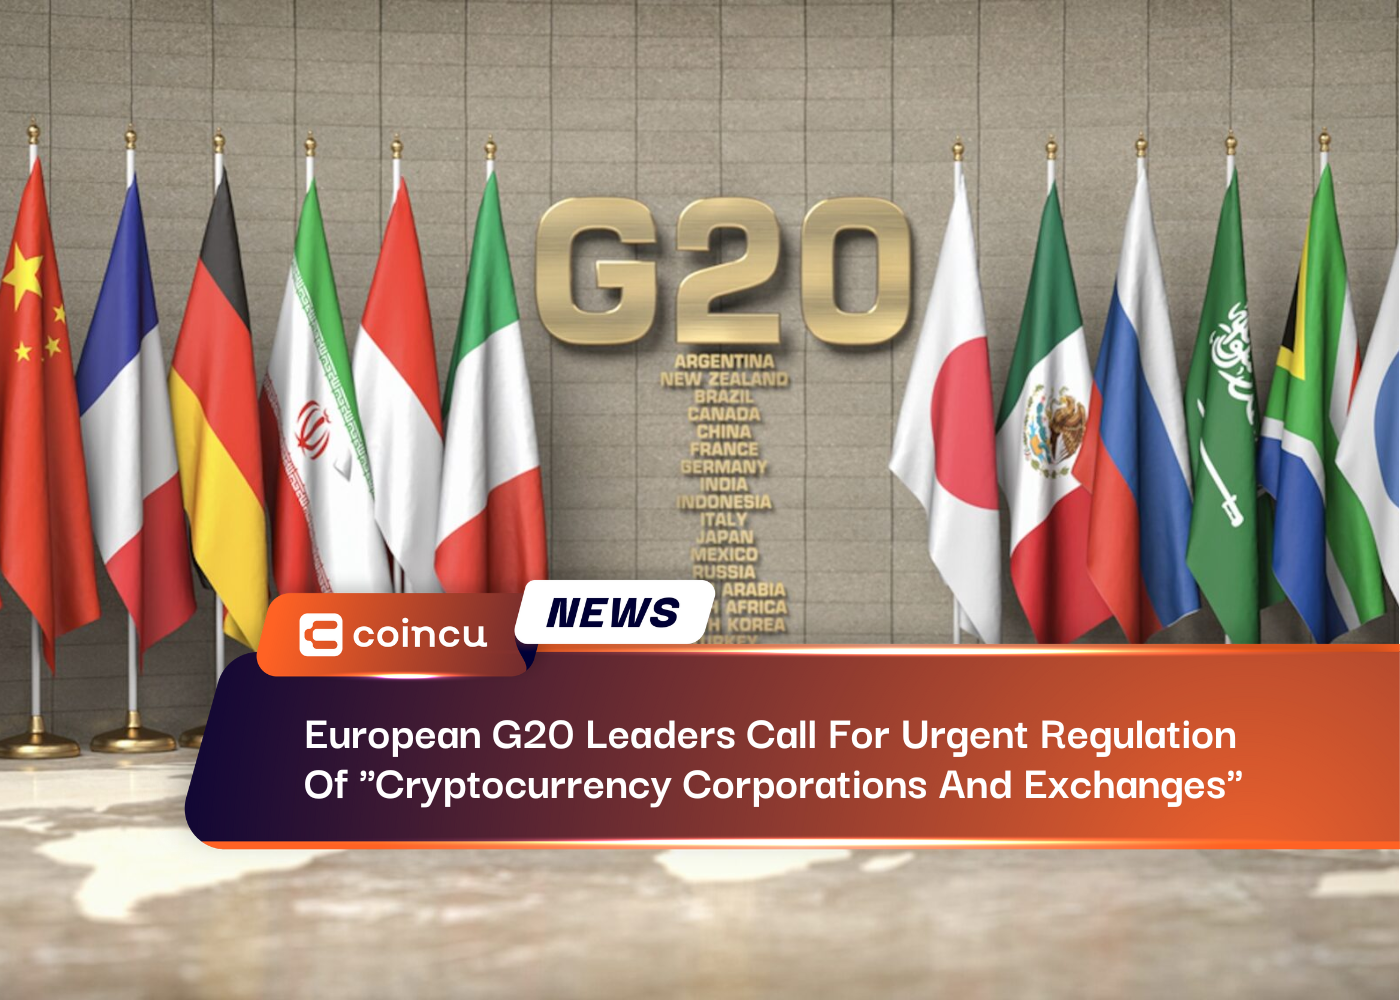 European G20 Leaders Call For Urgent Regulation Of "Cryptocurrency Corporations And Exchanges"